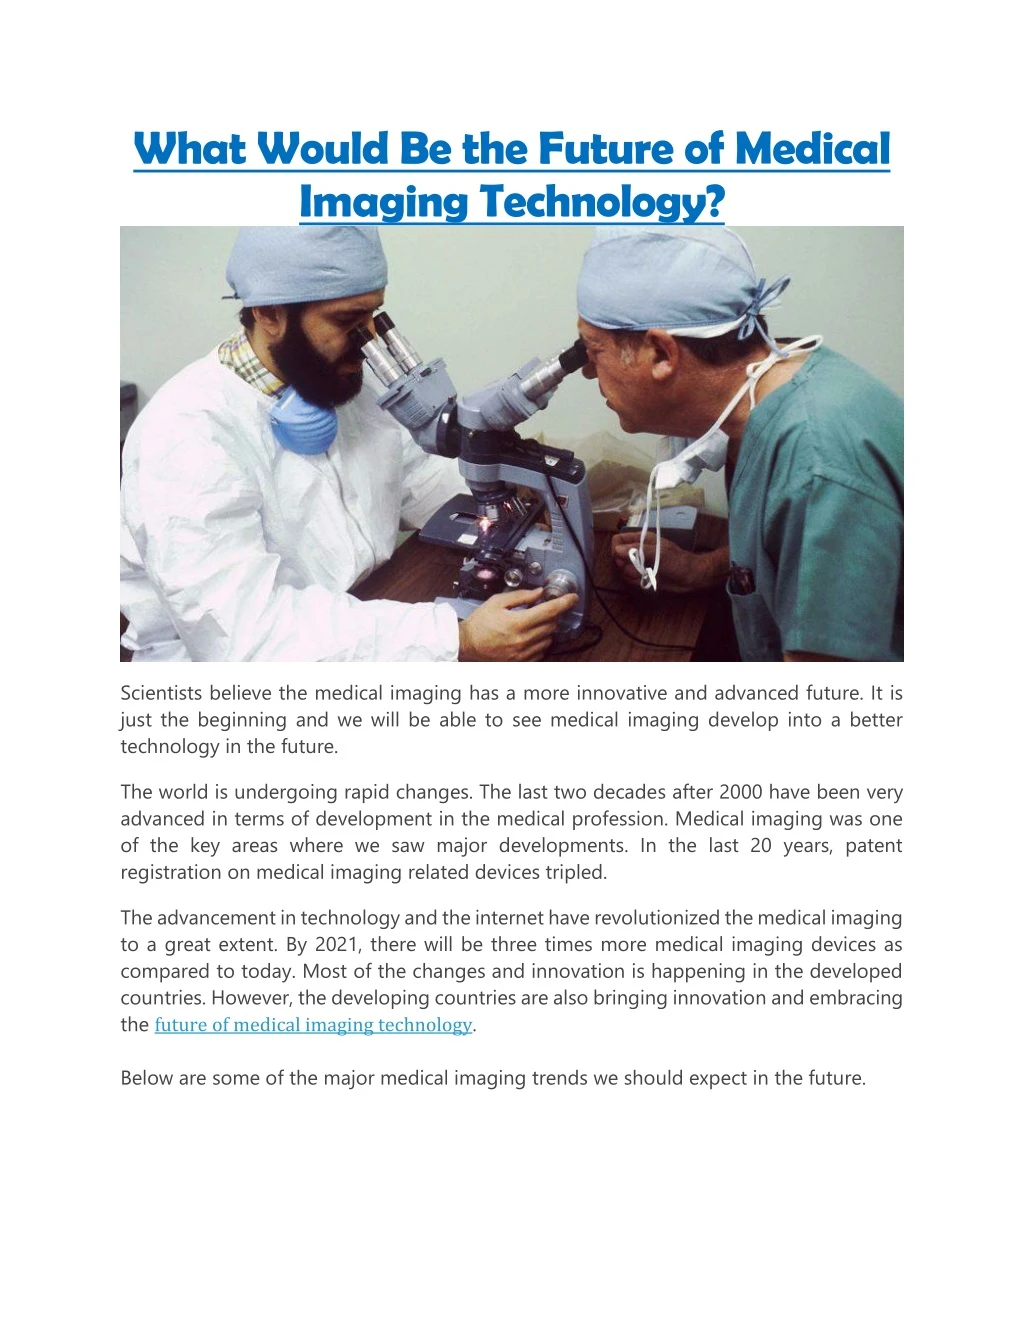 what would be the future of medical imaging